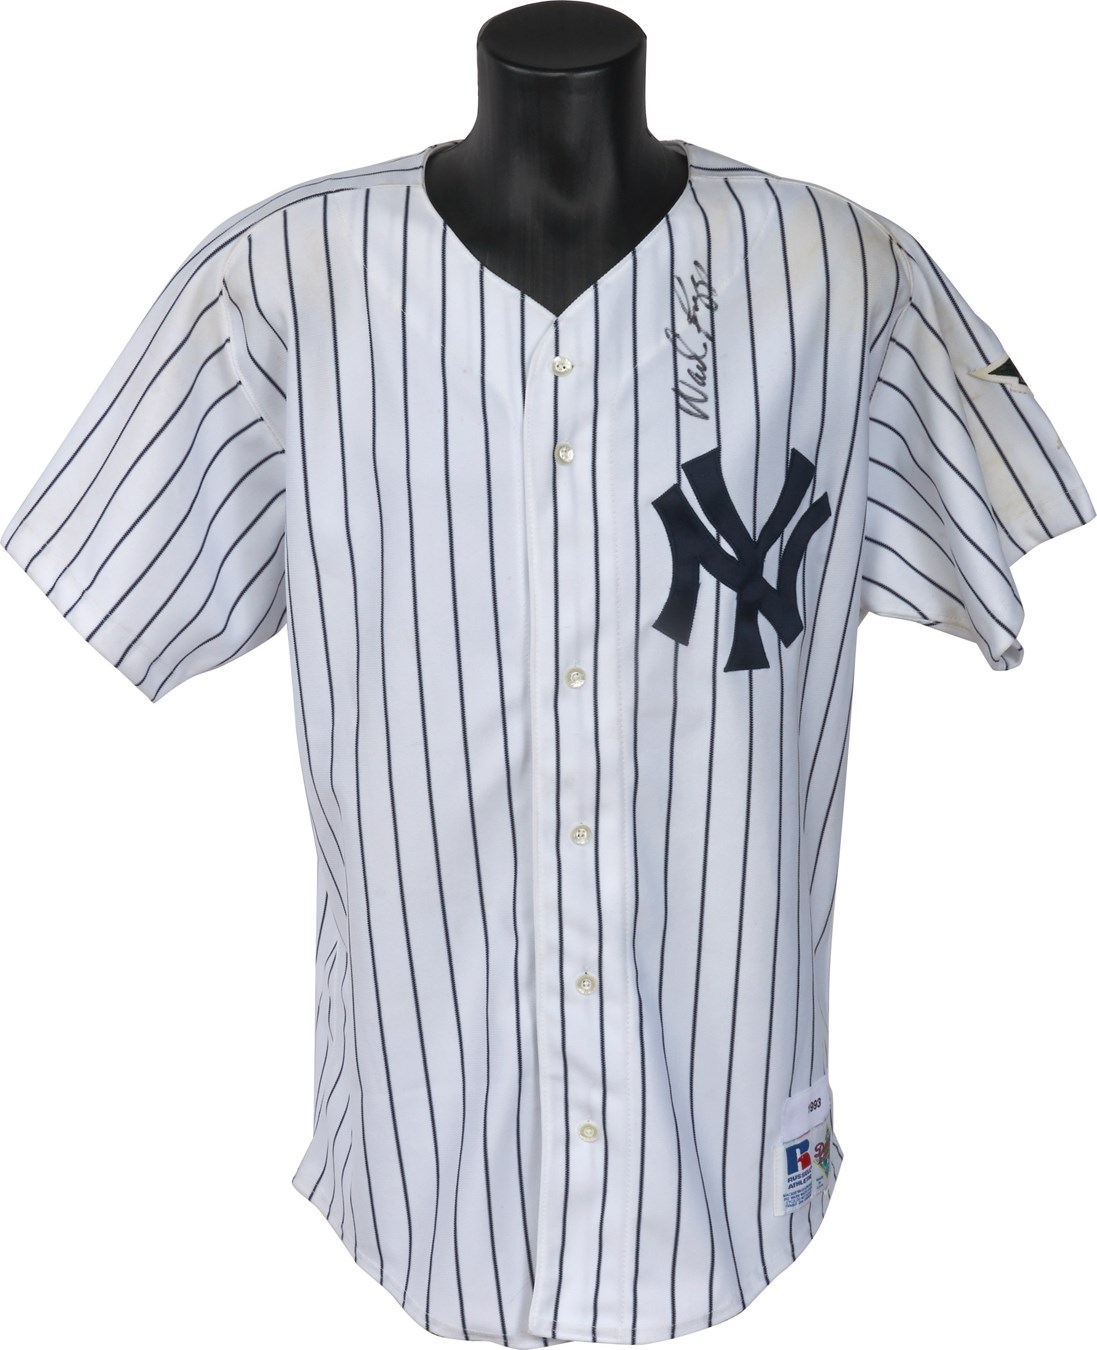 NY Yankees, Giants & Mets - 1993 Wade Boggs New York Yankees All-Star Game Worn Jersey (Photomatched)